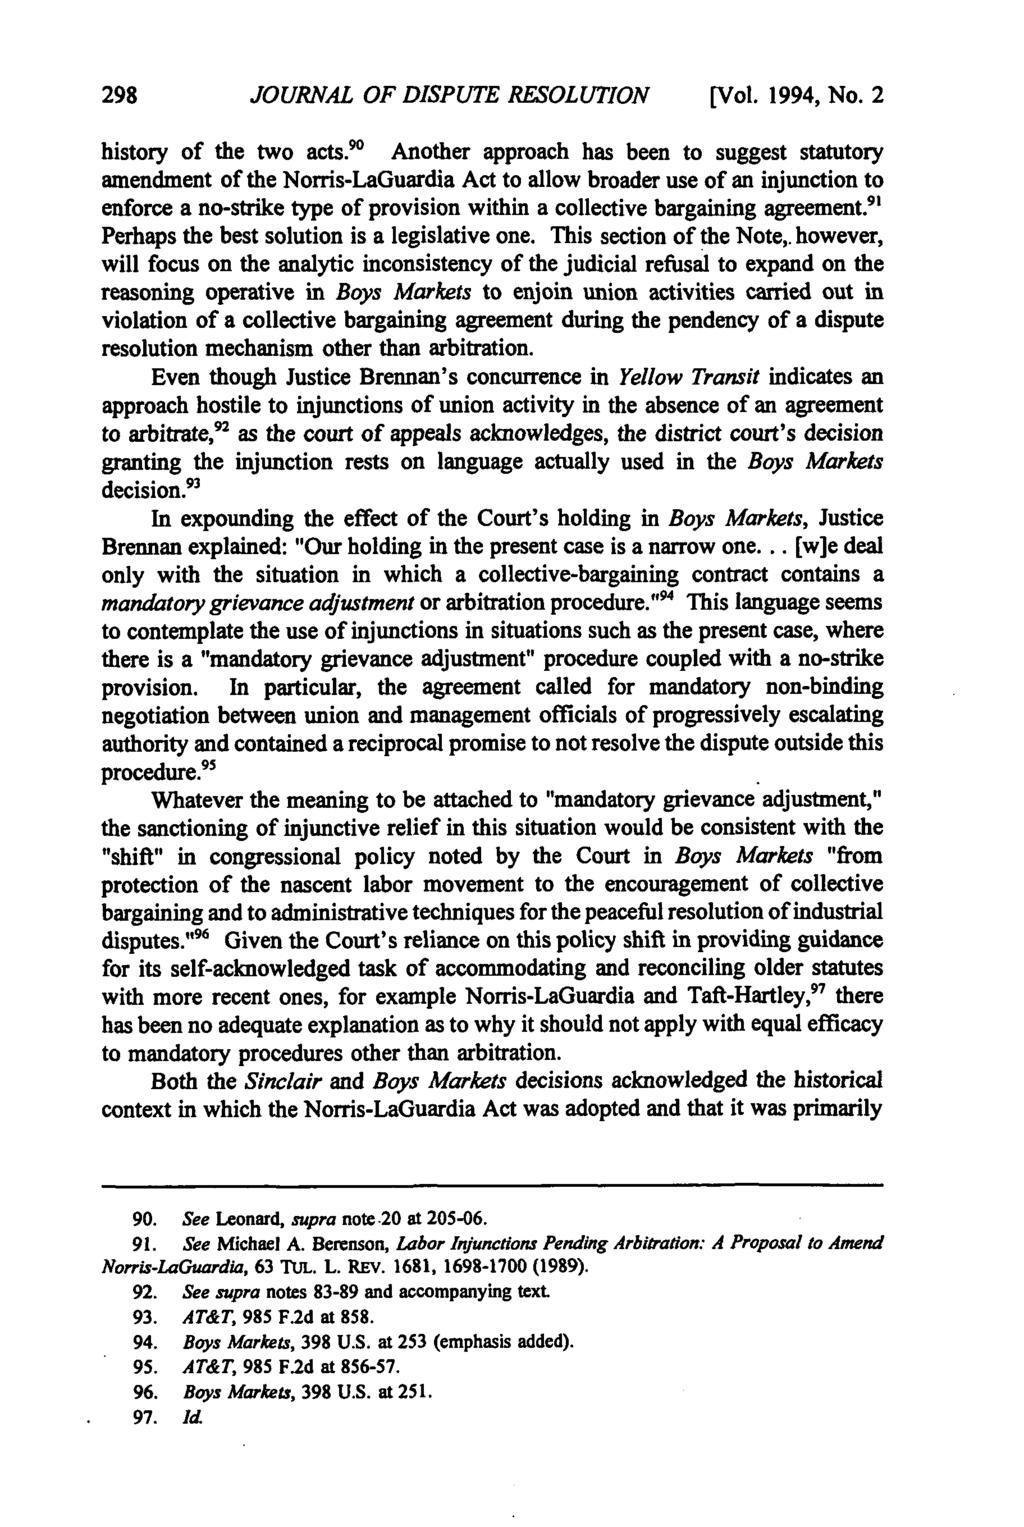 Journal of Dispute Resolution, Vol. 1994, Iss. 2 [1994], Art. 6 JOURNAL OF DISPUTE RESOLUTION [Vol. 1994, No. 2 history of the two acts.